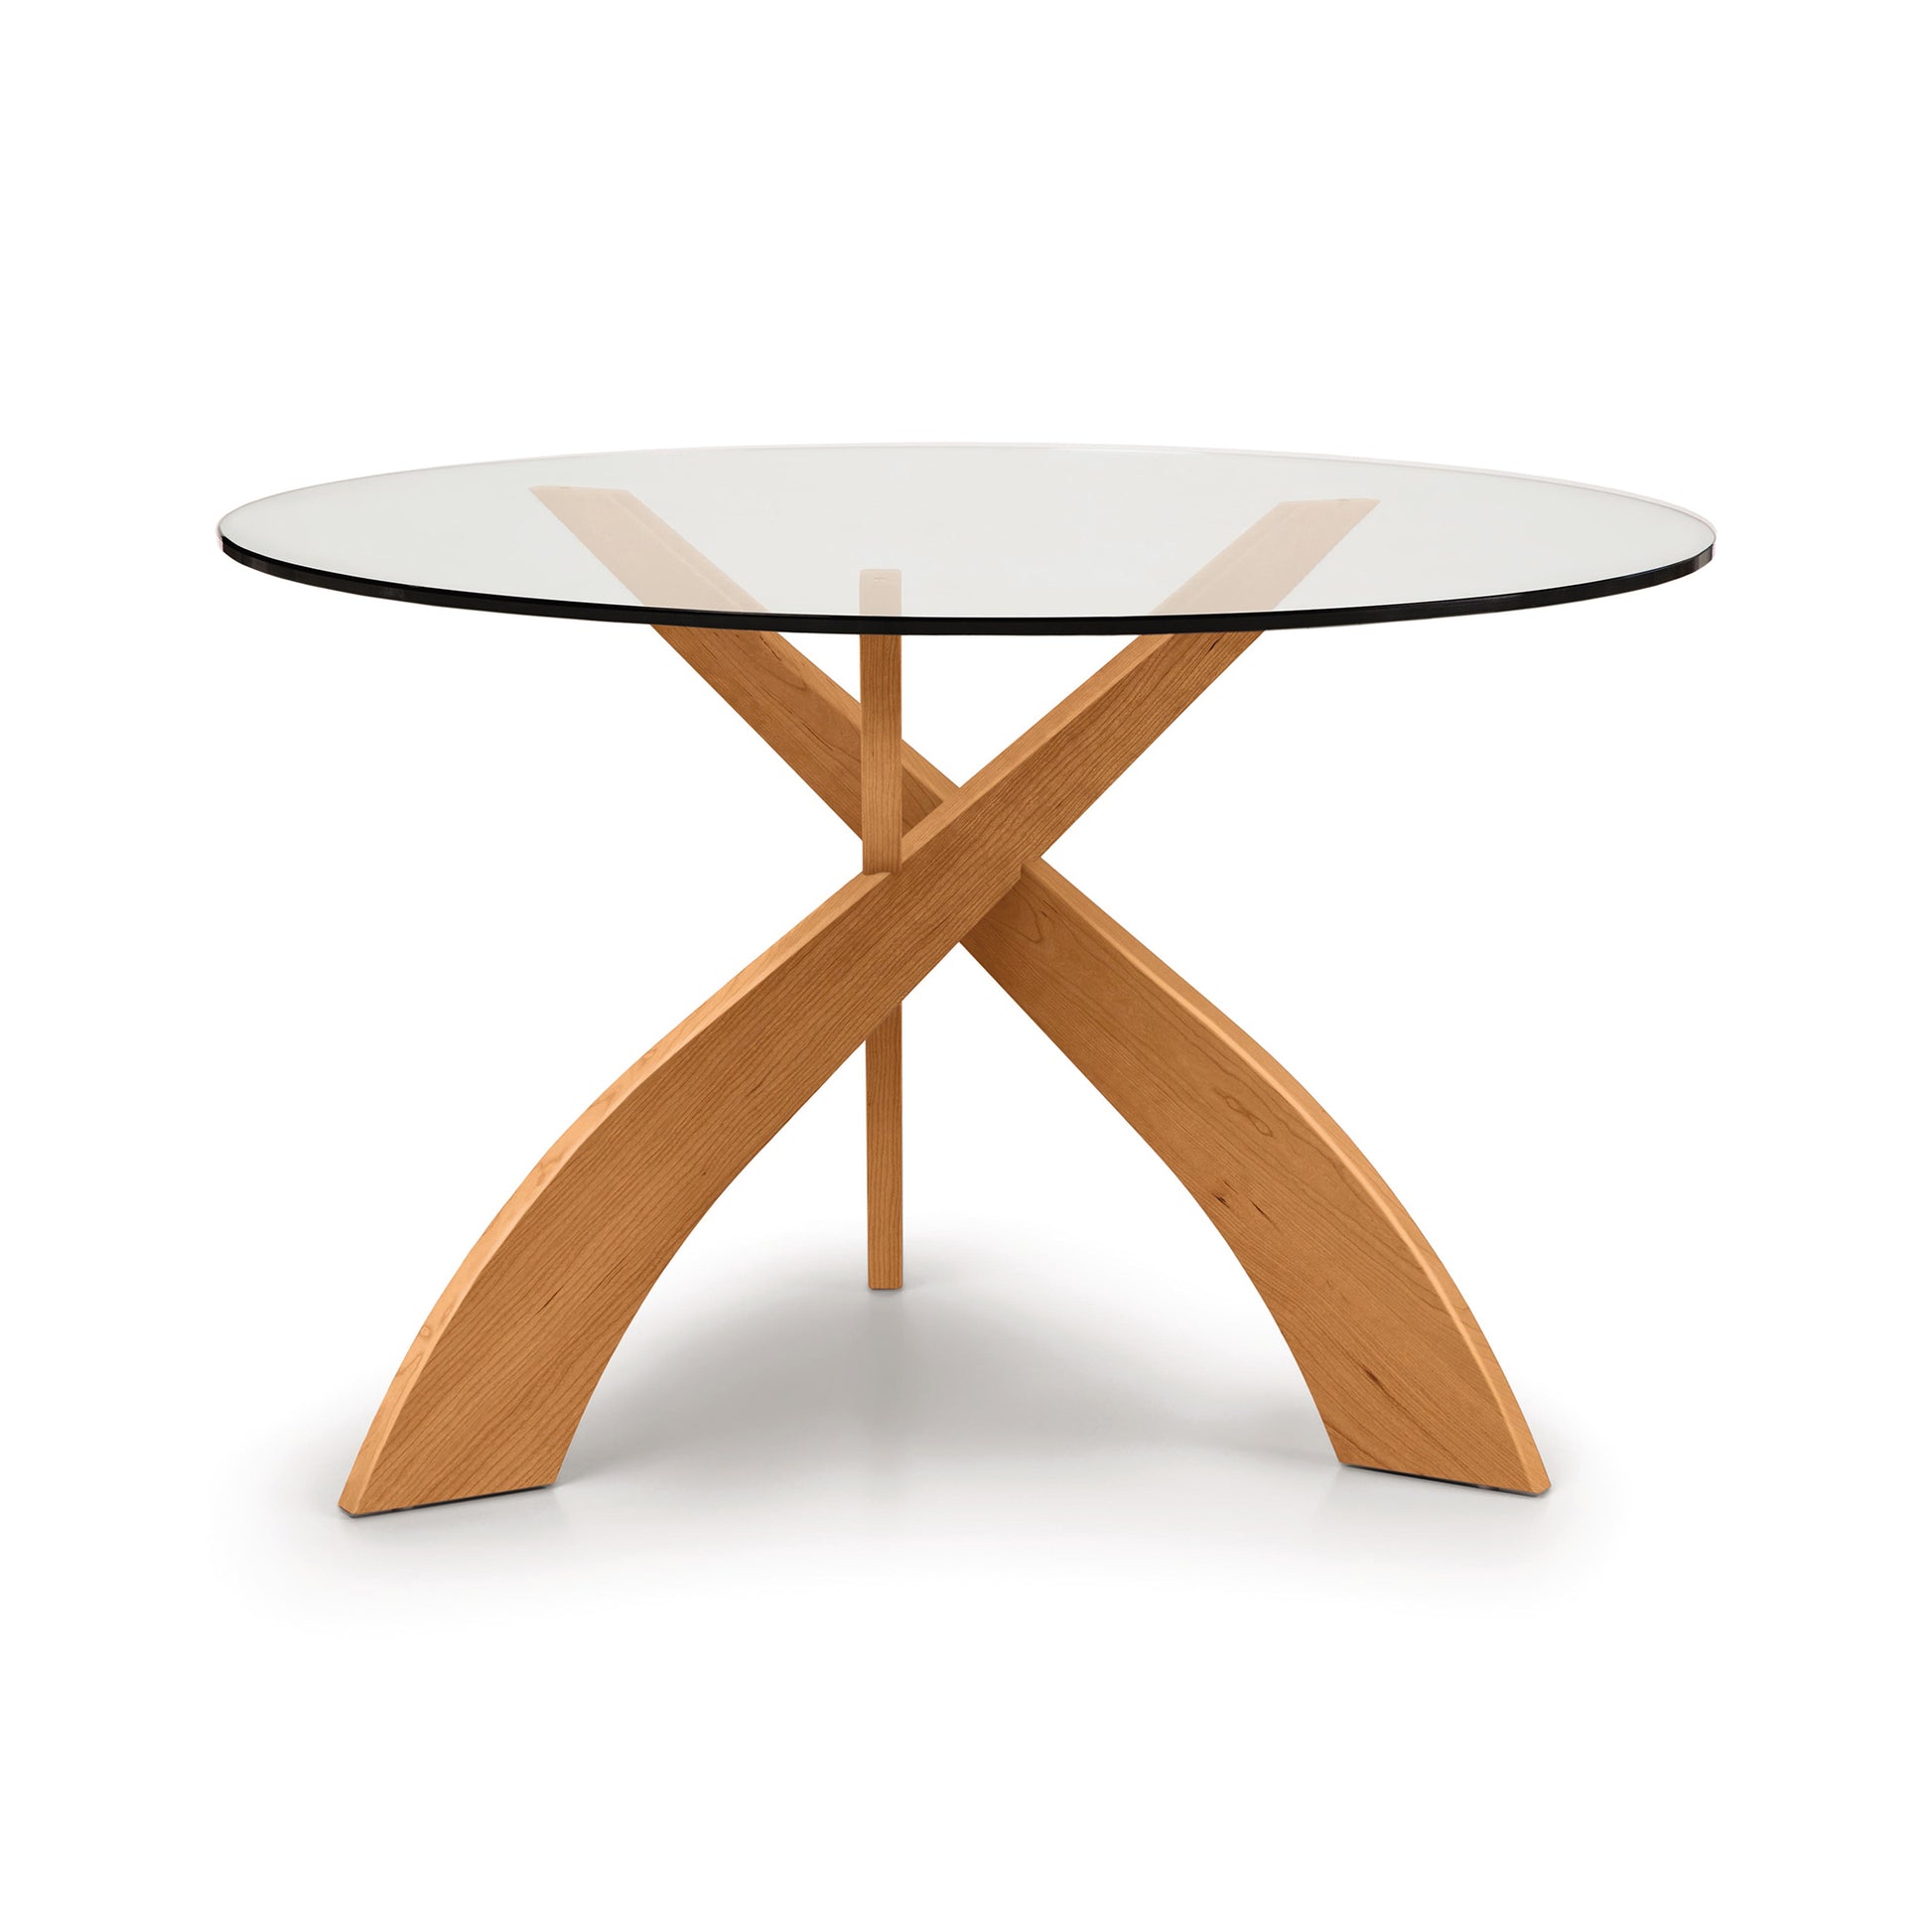 Entwine Round Glass Top Dining Table by Copeland Furniture with a cherry wood cross base design on a white background.